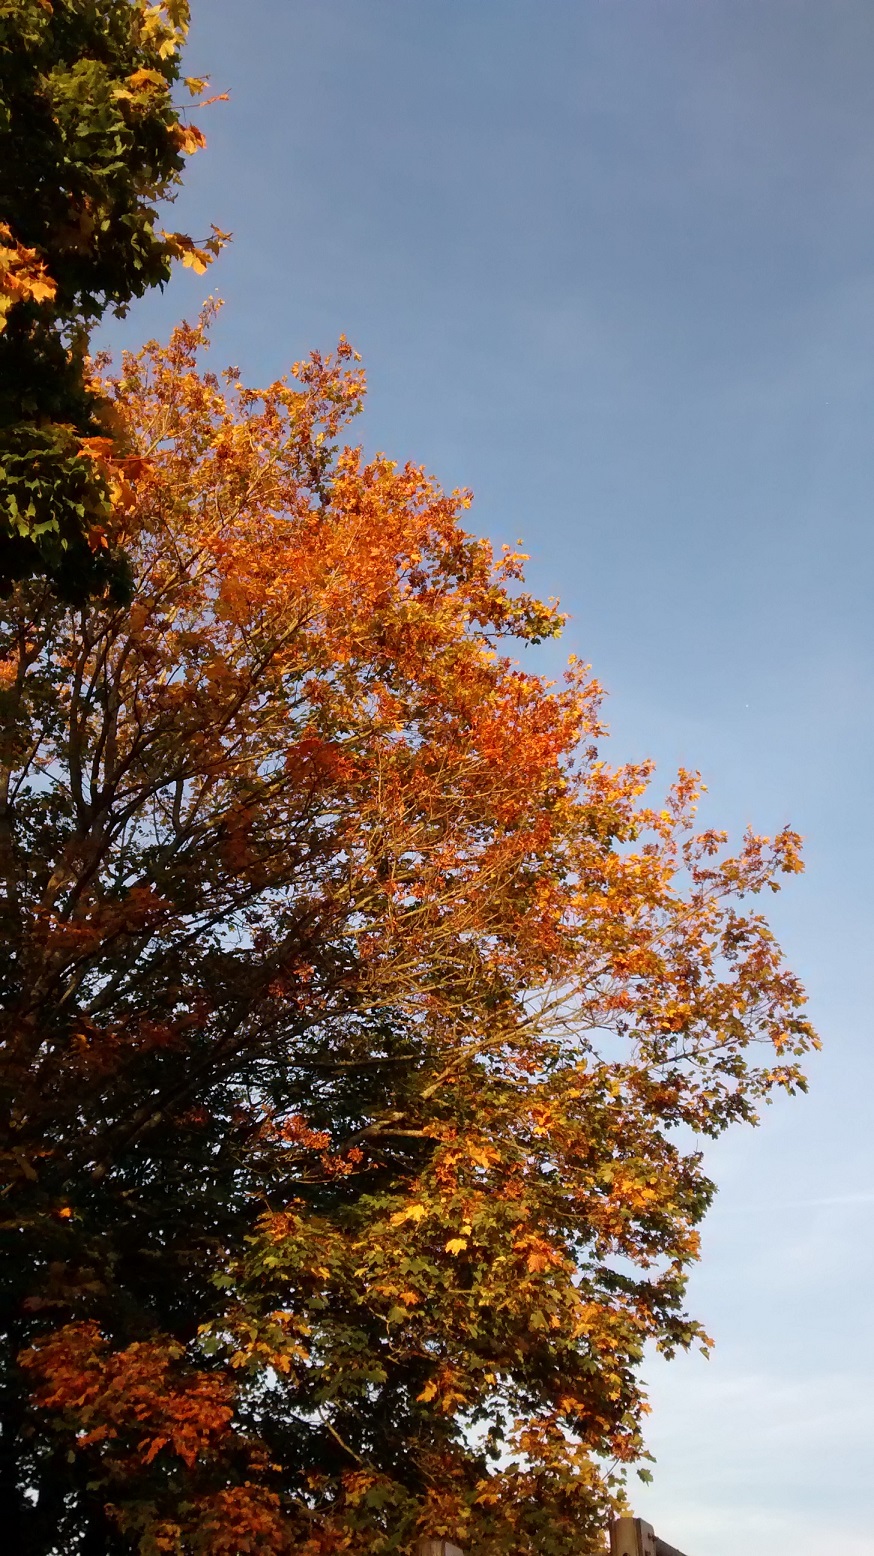 A deciduous tree in autumn turning copper and gold, against a blue sky background